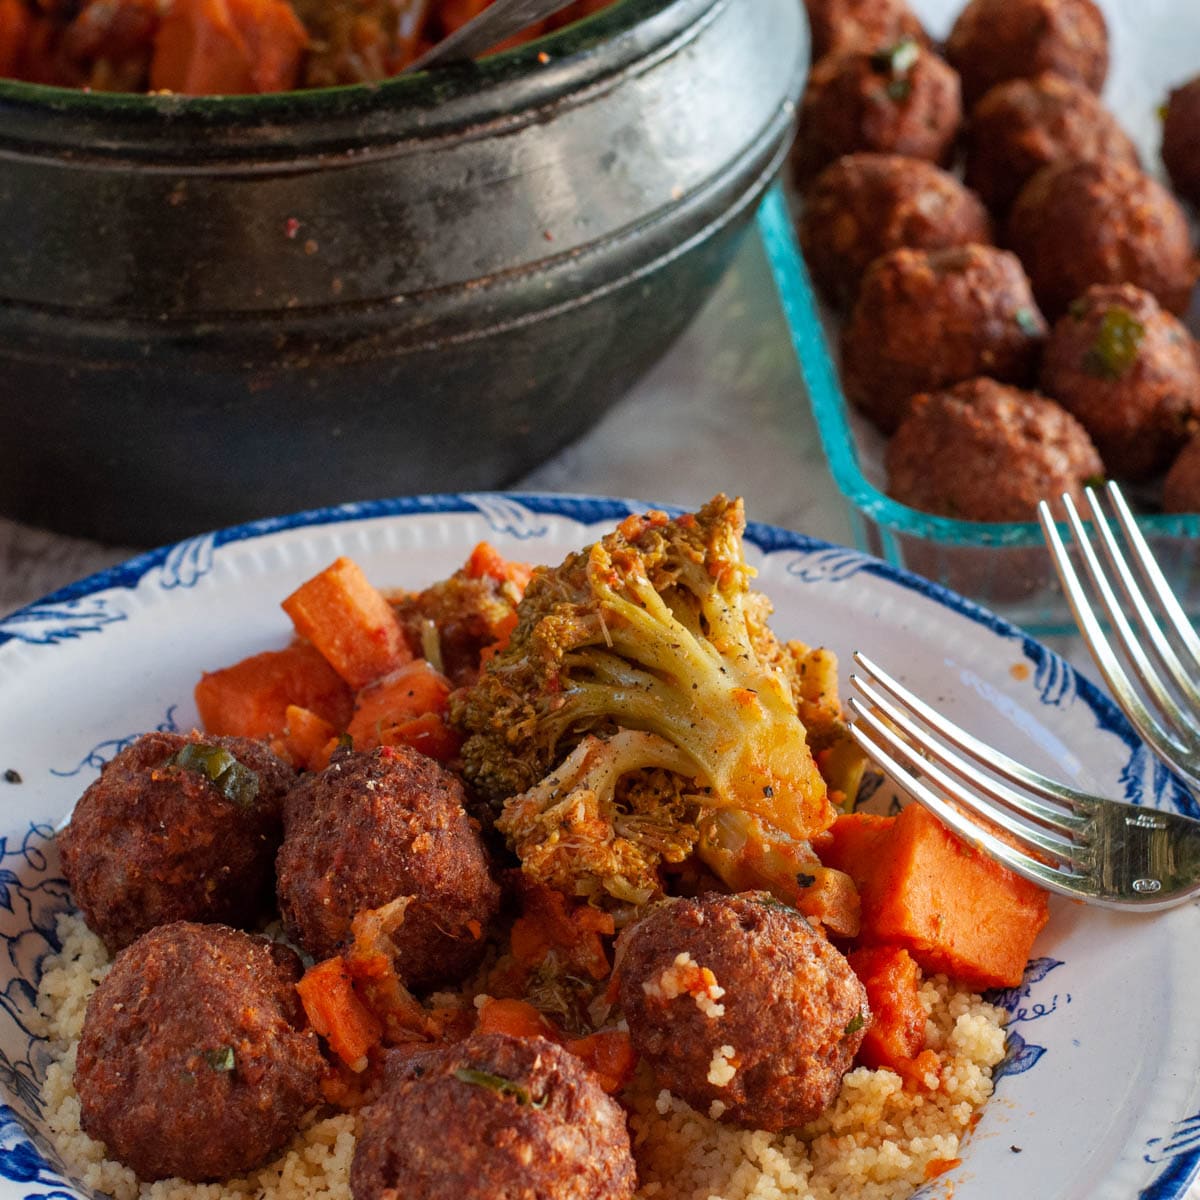 Meatballs with Vegetables and Couscous